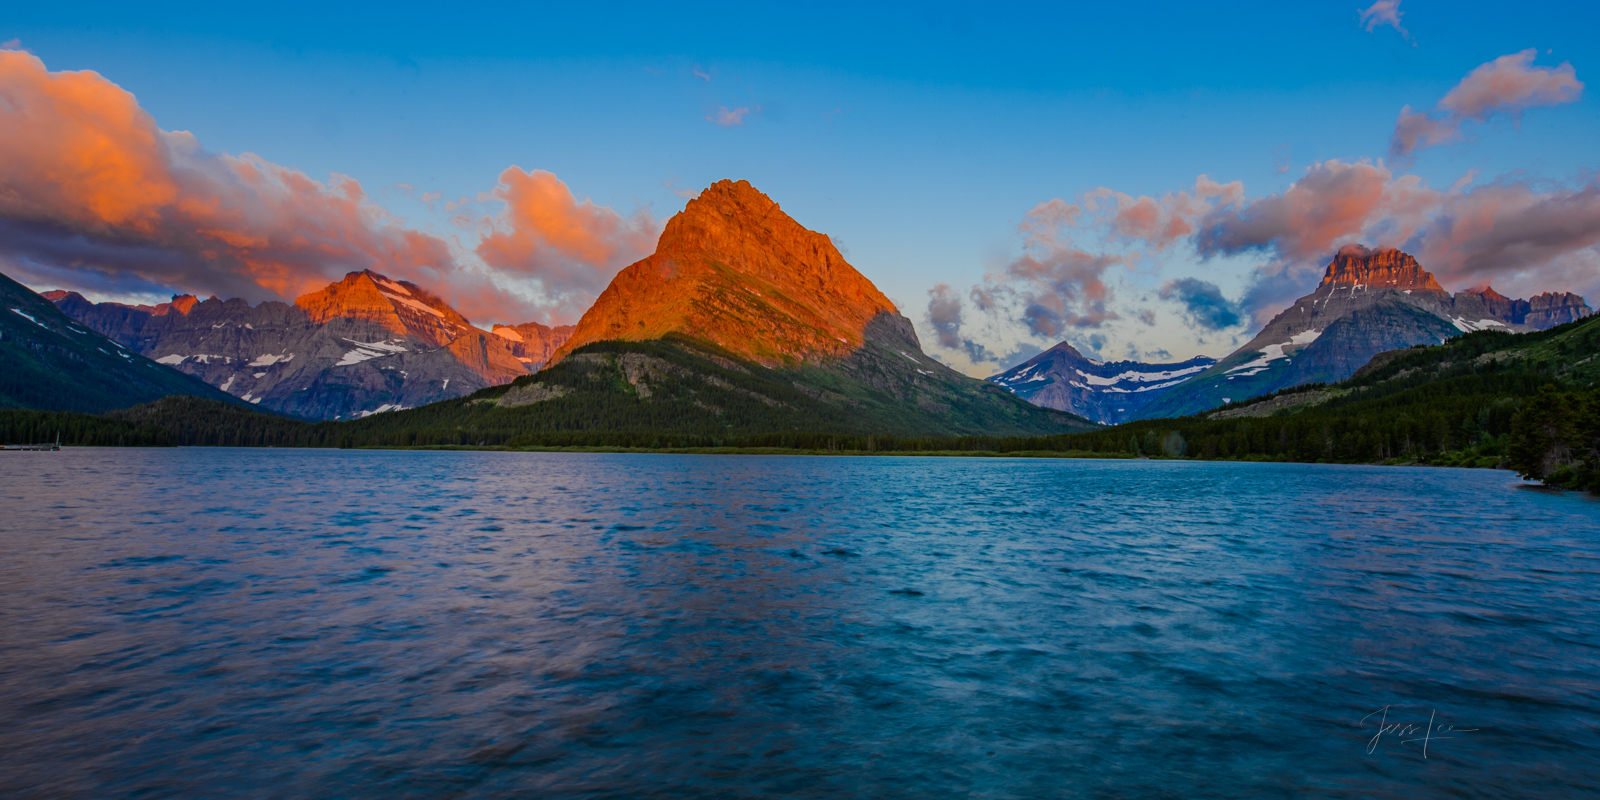 Picture of Glacier National Park. A fine Art Limited Edition Print of sunset at Glacier. Order yours today and enjoy the beauty...